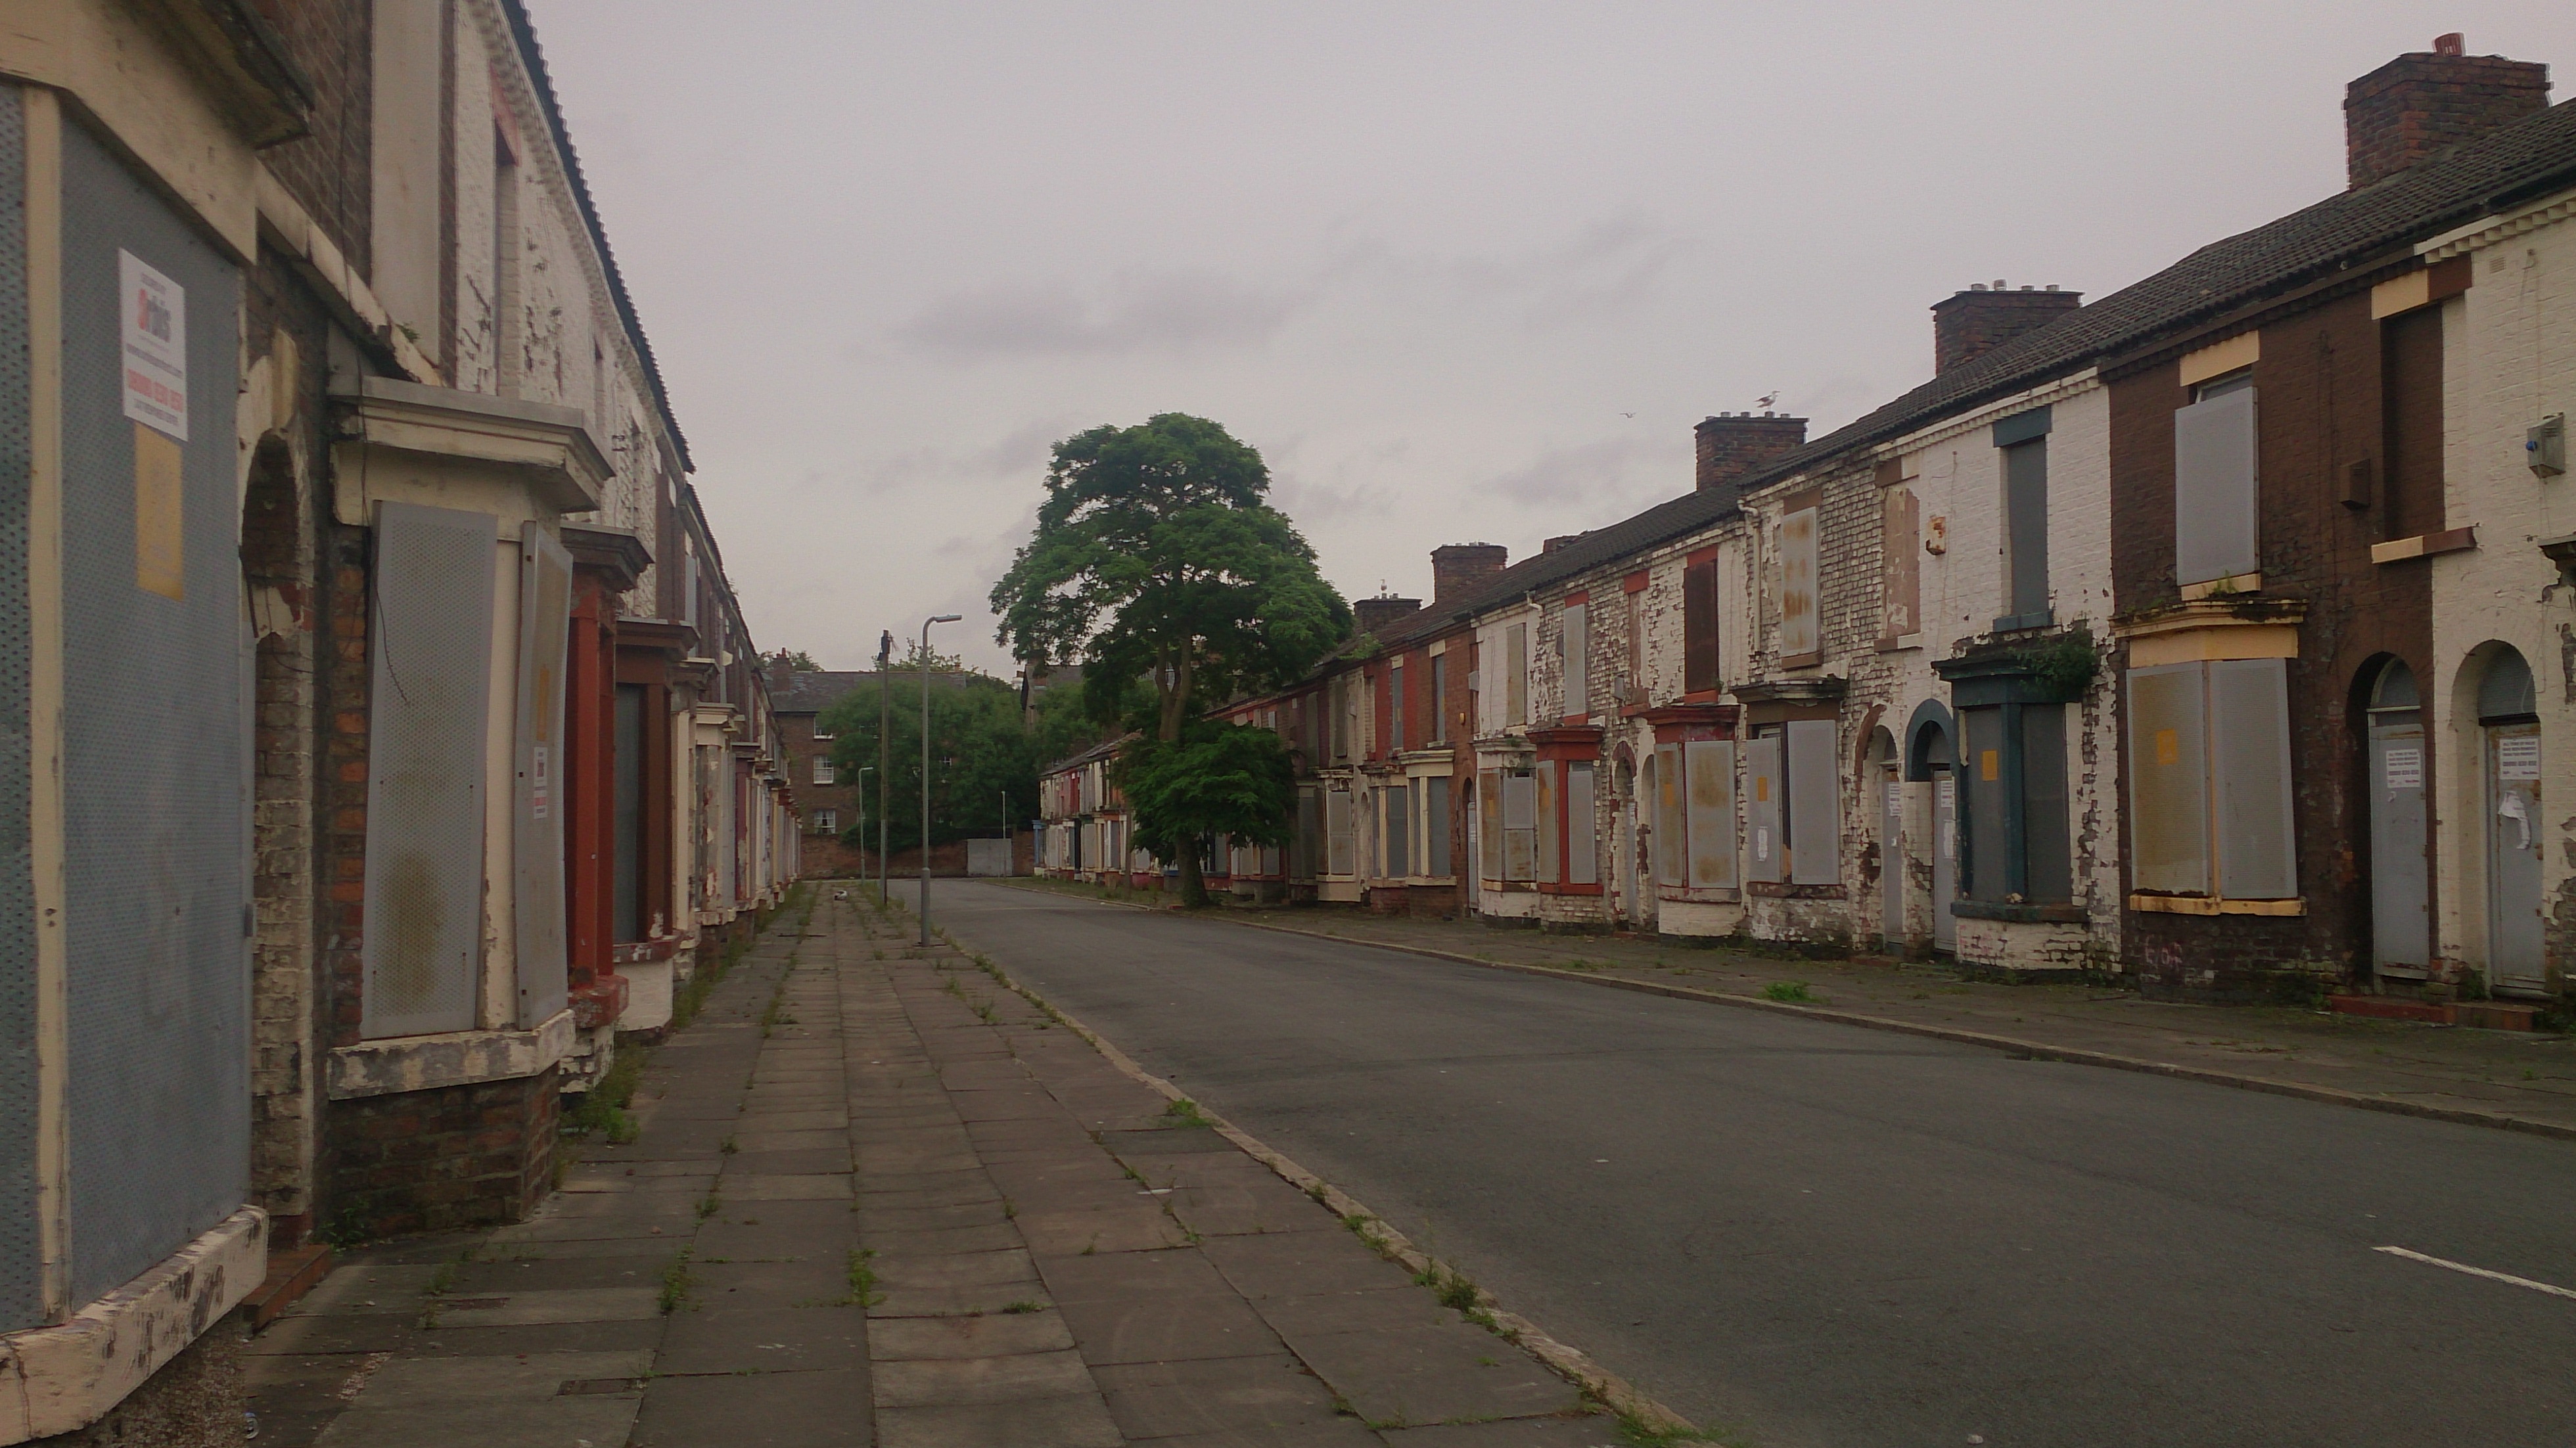 Boarded up houses in the Welsh Streets, Liverpool